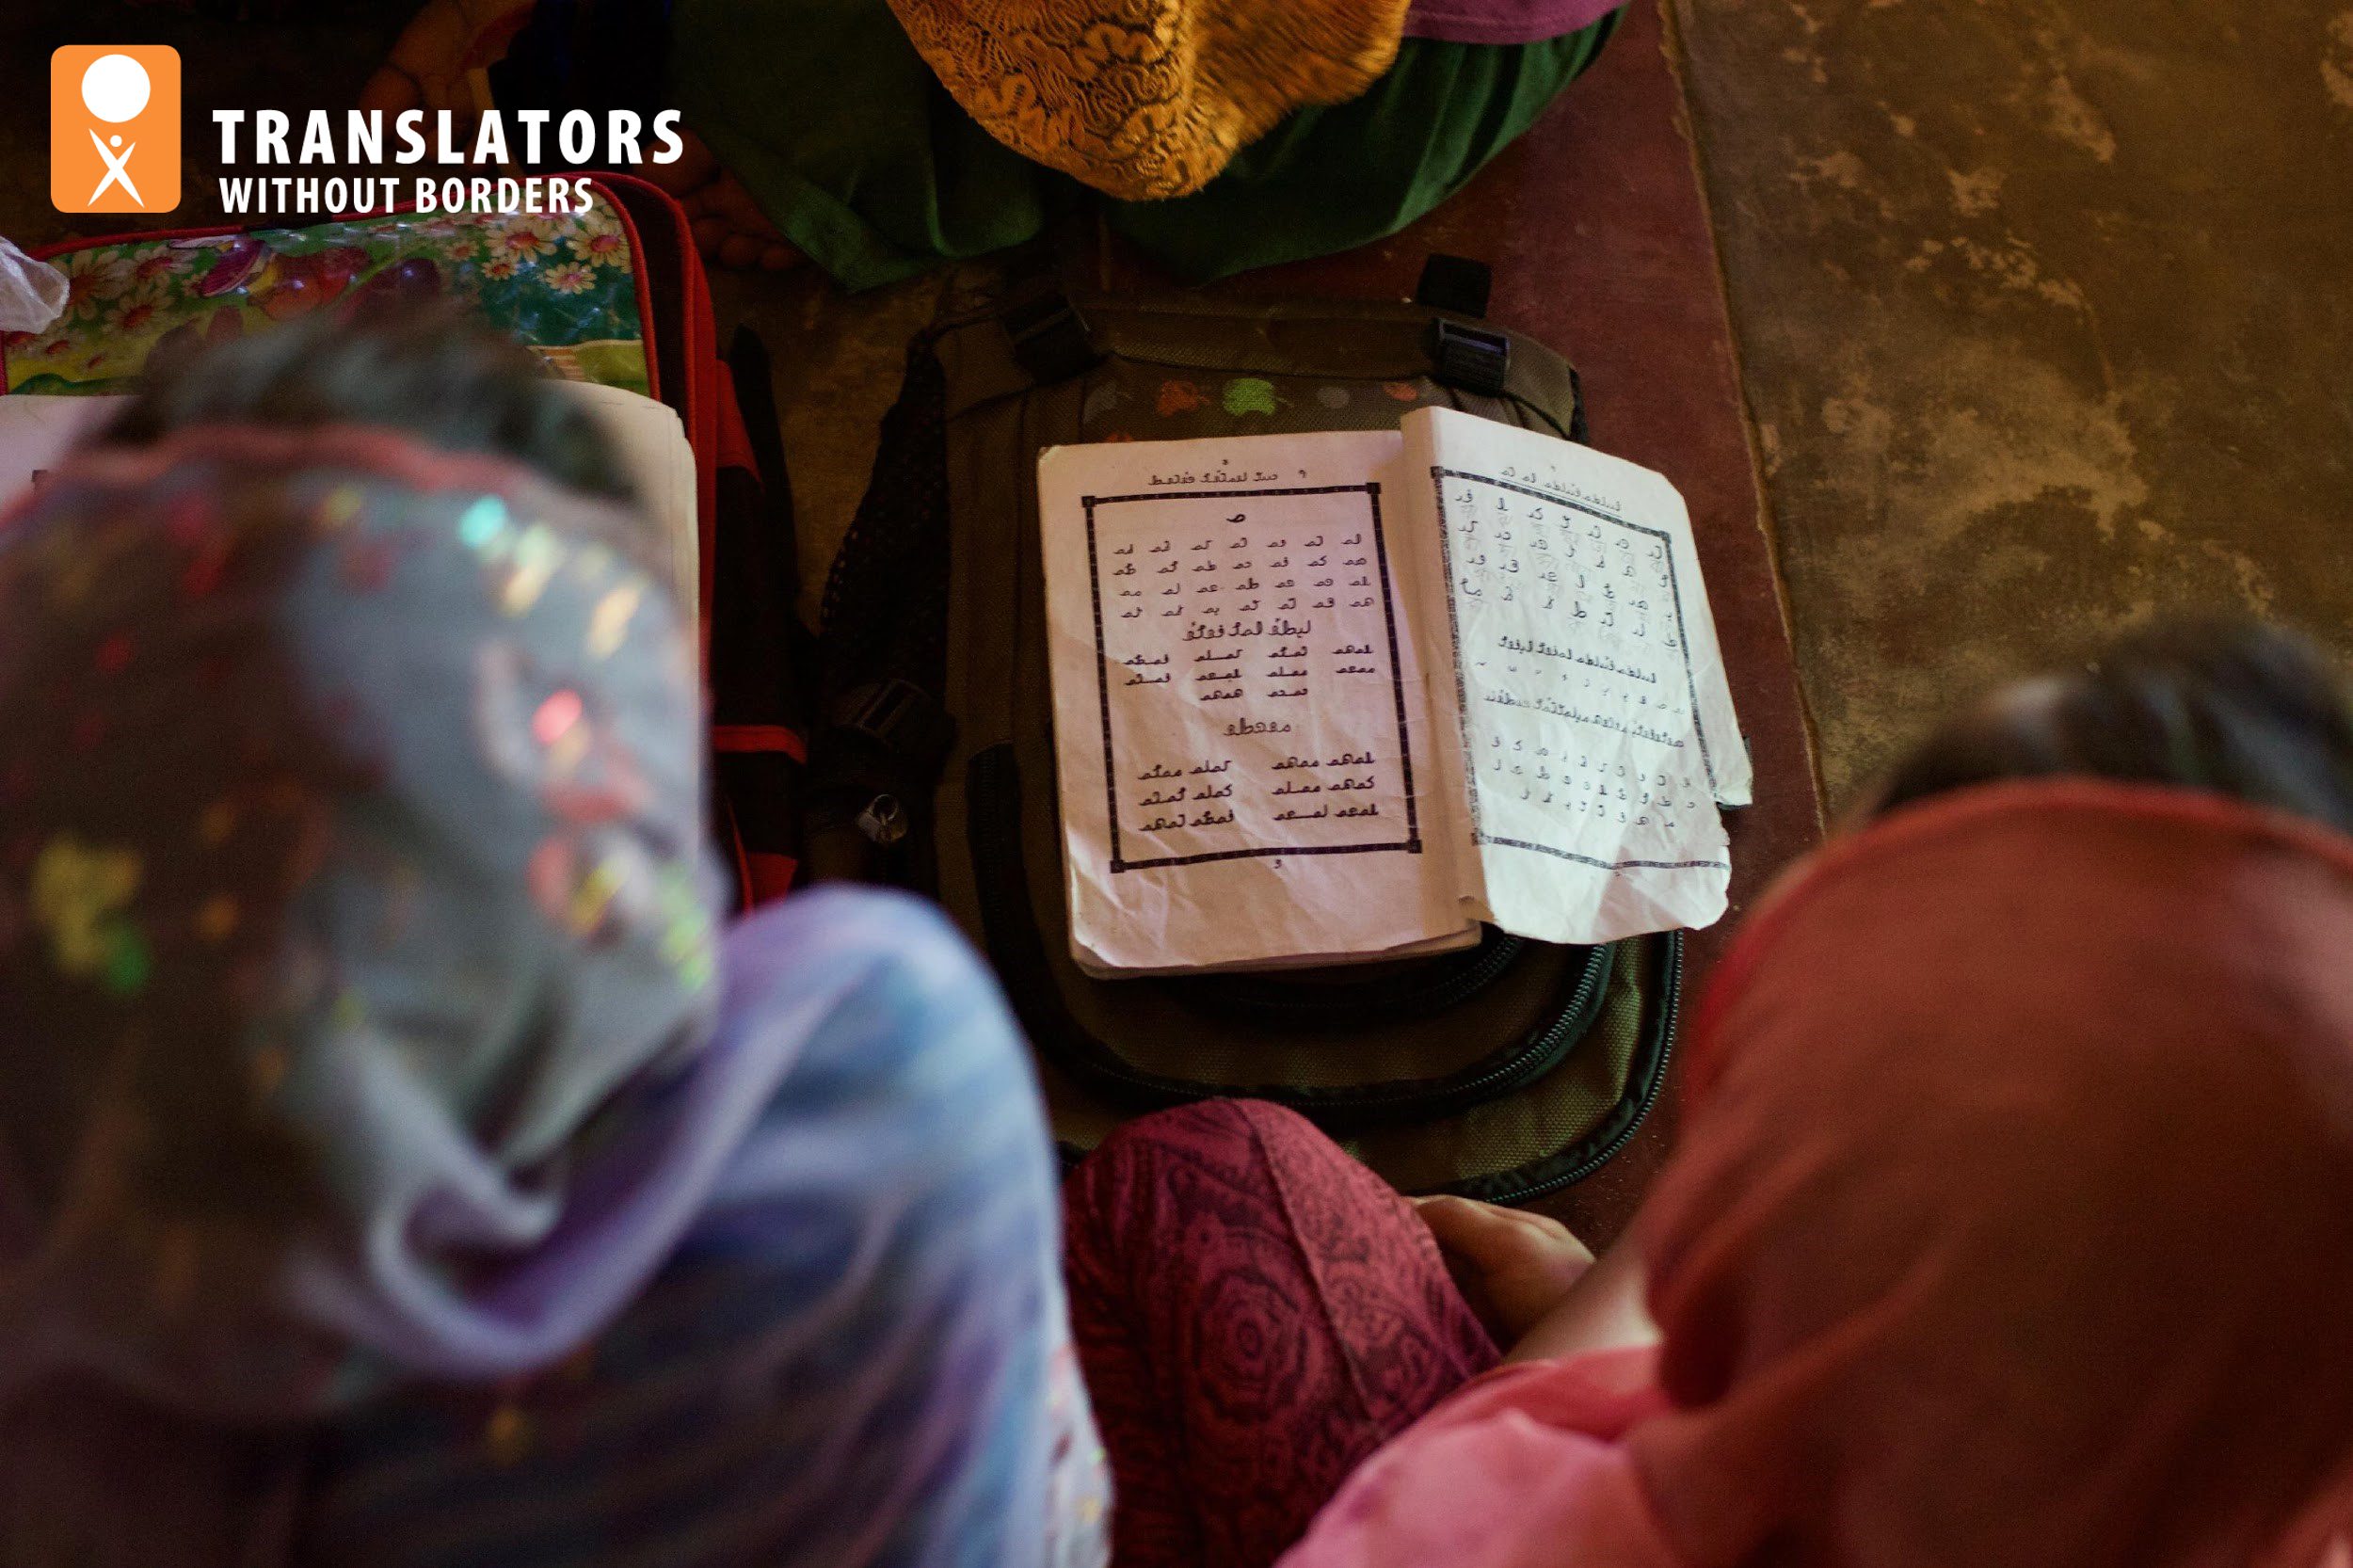 Translators without borders. Looking over the heads and shoulders of two girls looking at a book written in script.